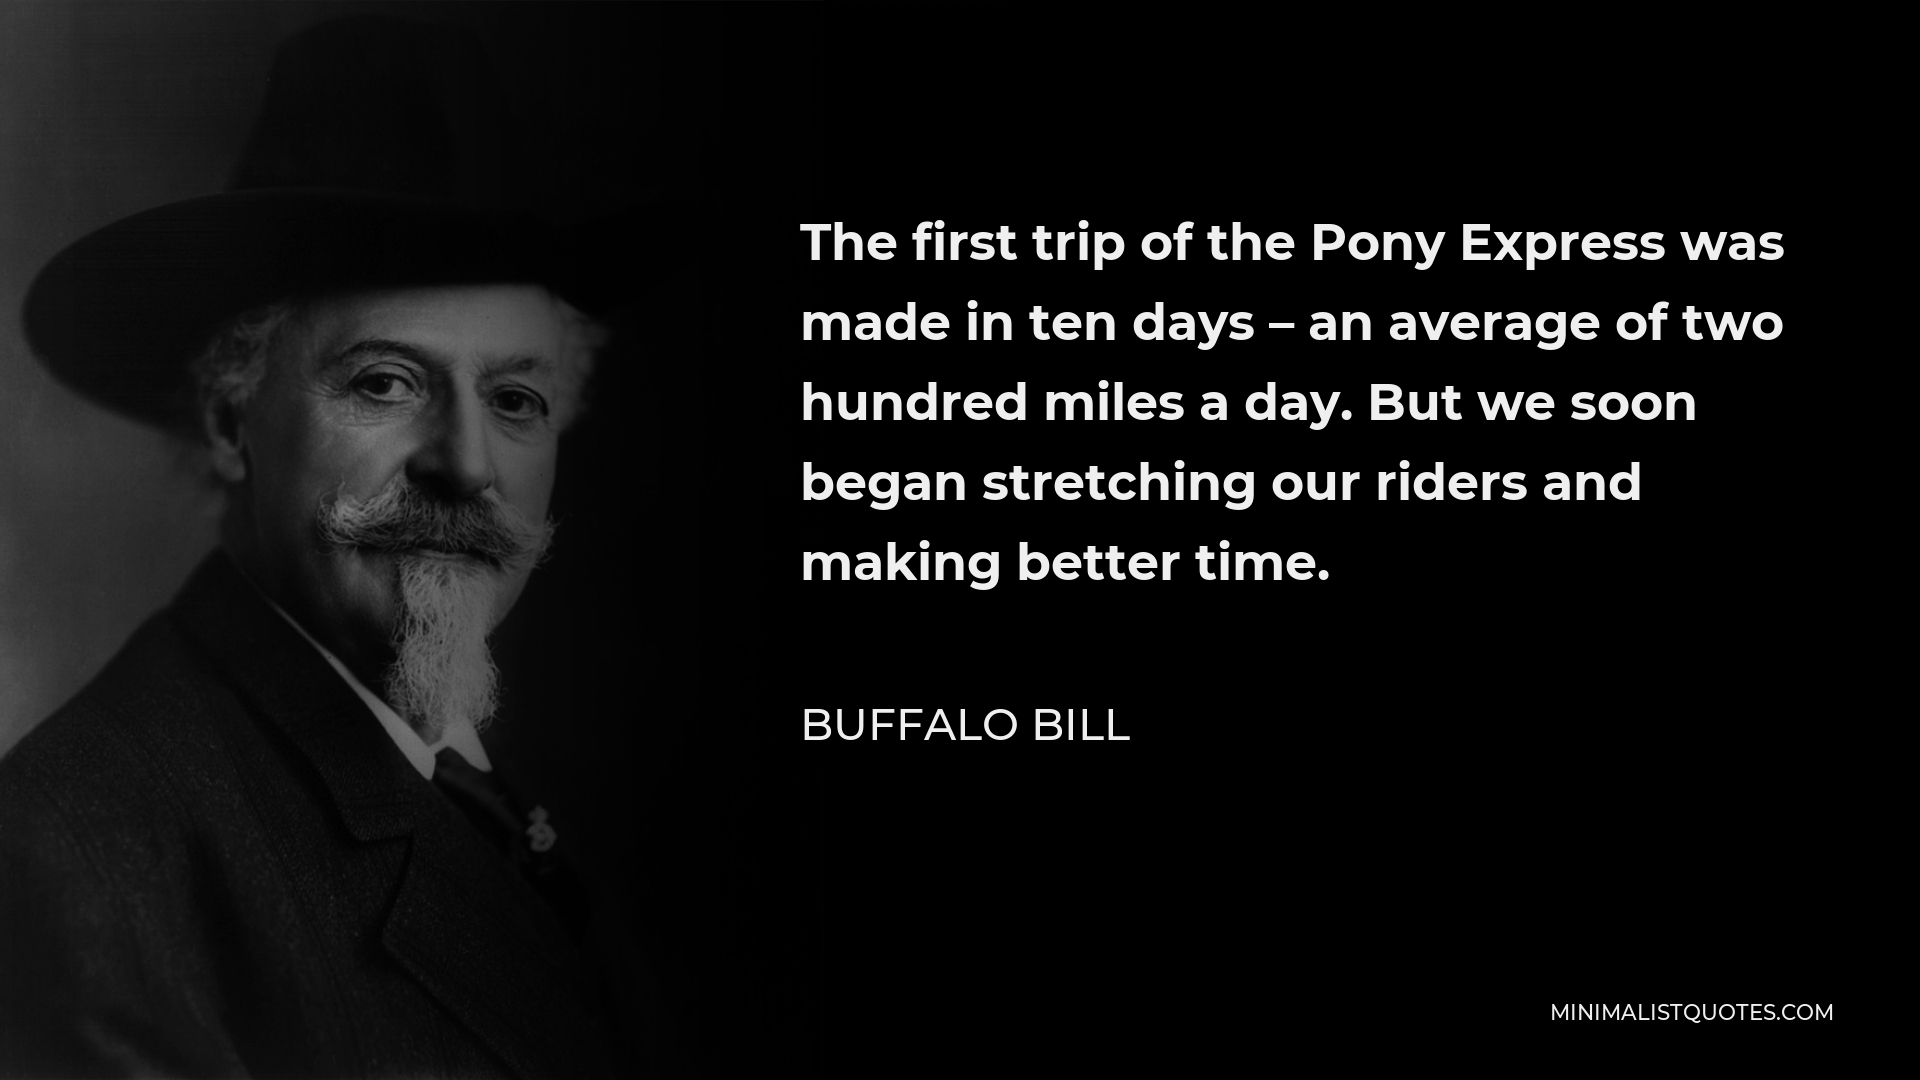 Buffalo Bill Quote - The first trip of the Pony Express was made in ten days – an average of two hundred miles a day. But we soon began stretching our riders and making better time.